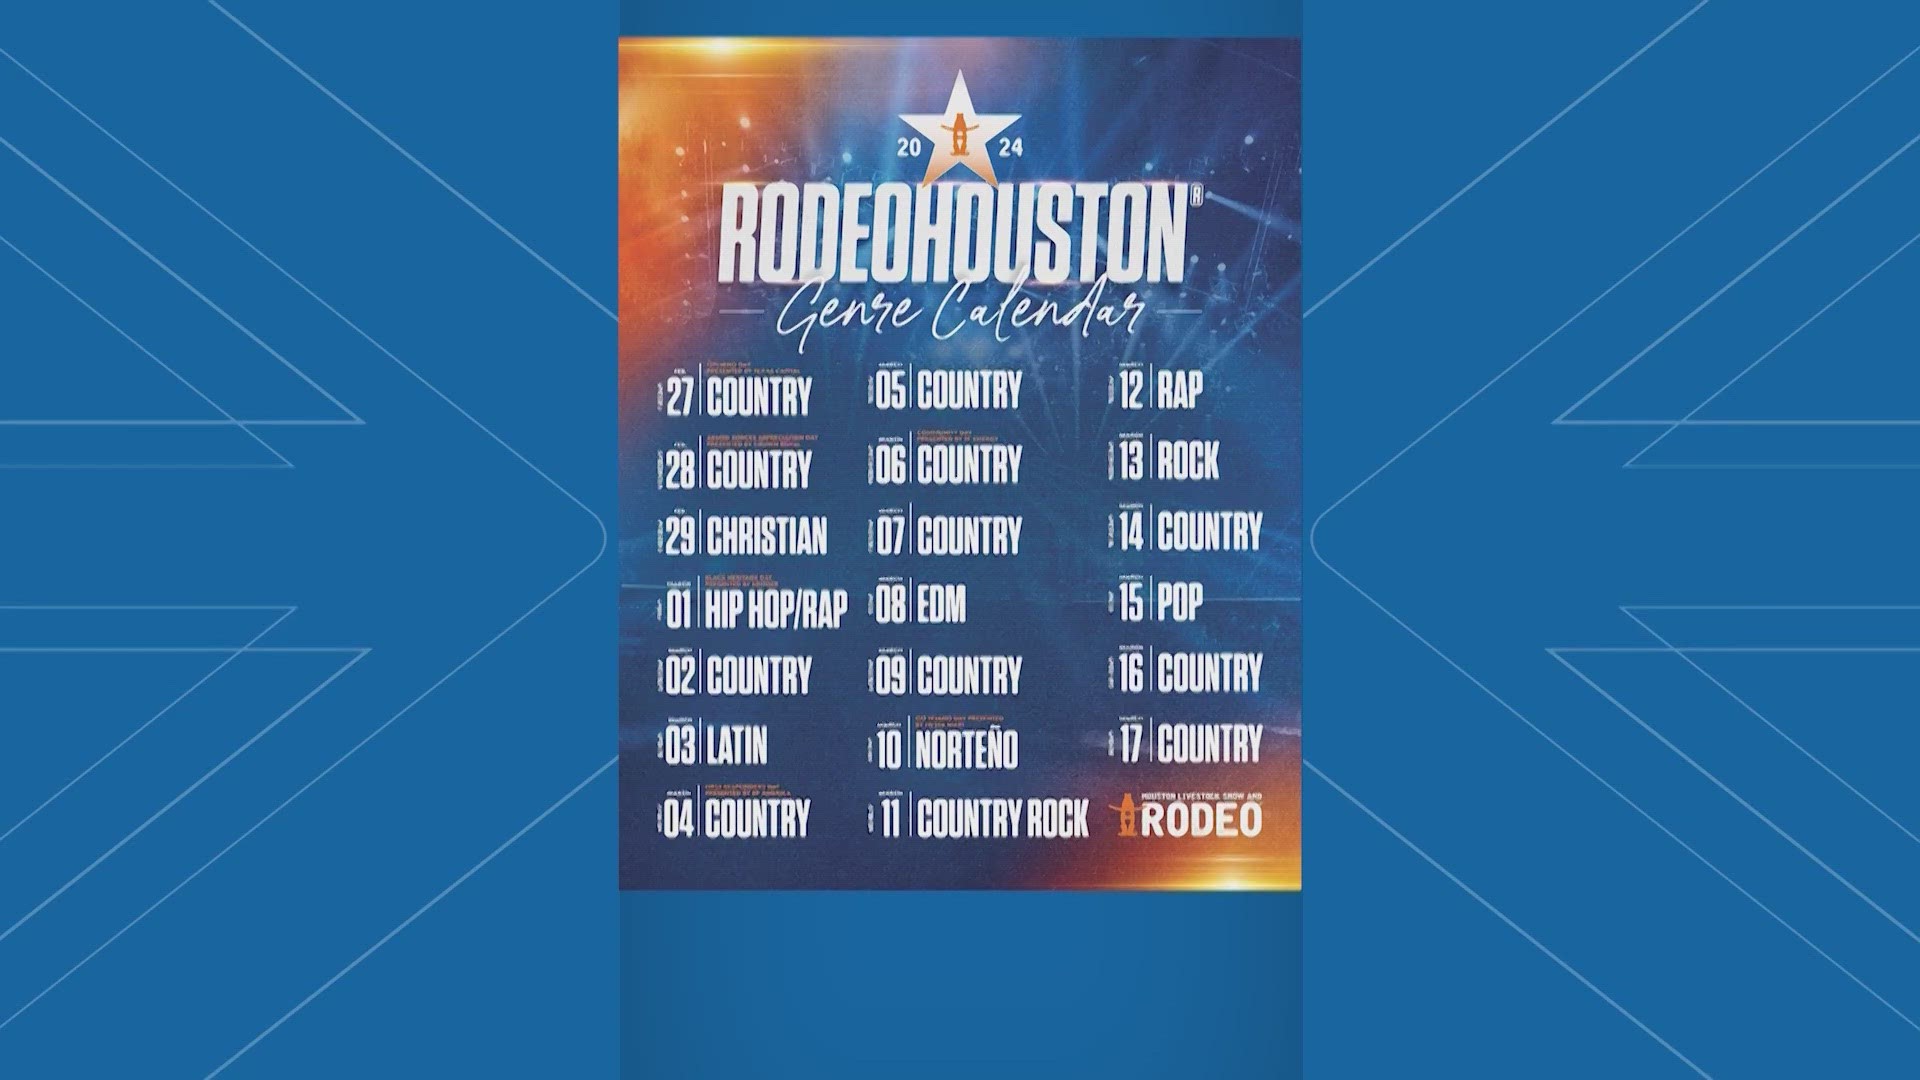 Rodeo Houston 2024 Concerts Schedule Of Events Dinah Flossie